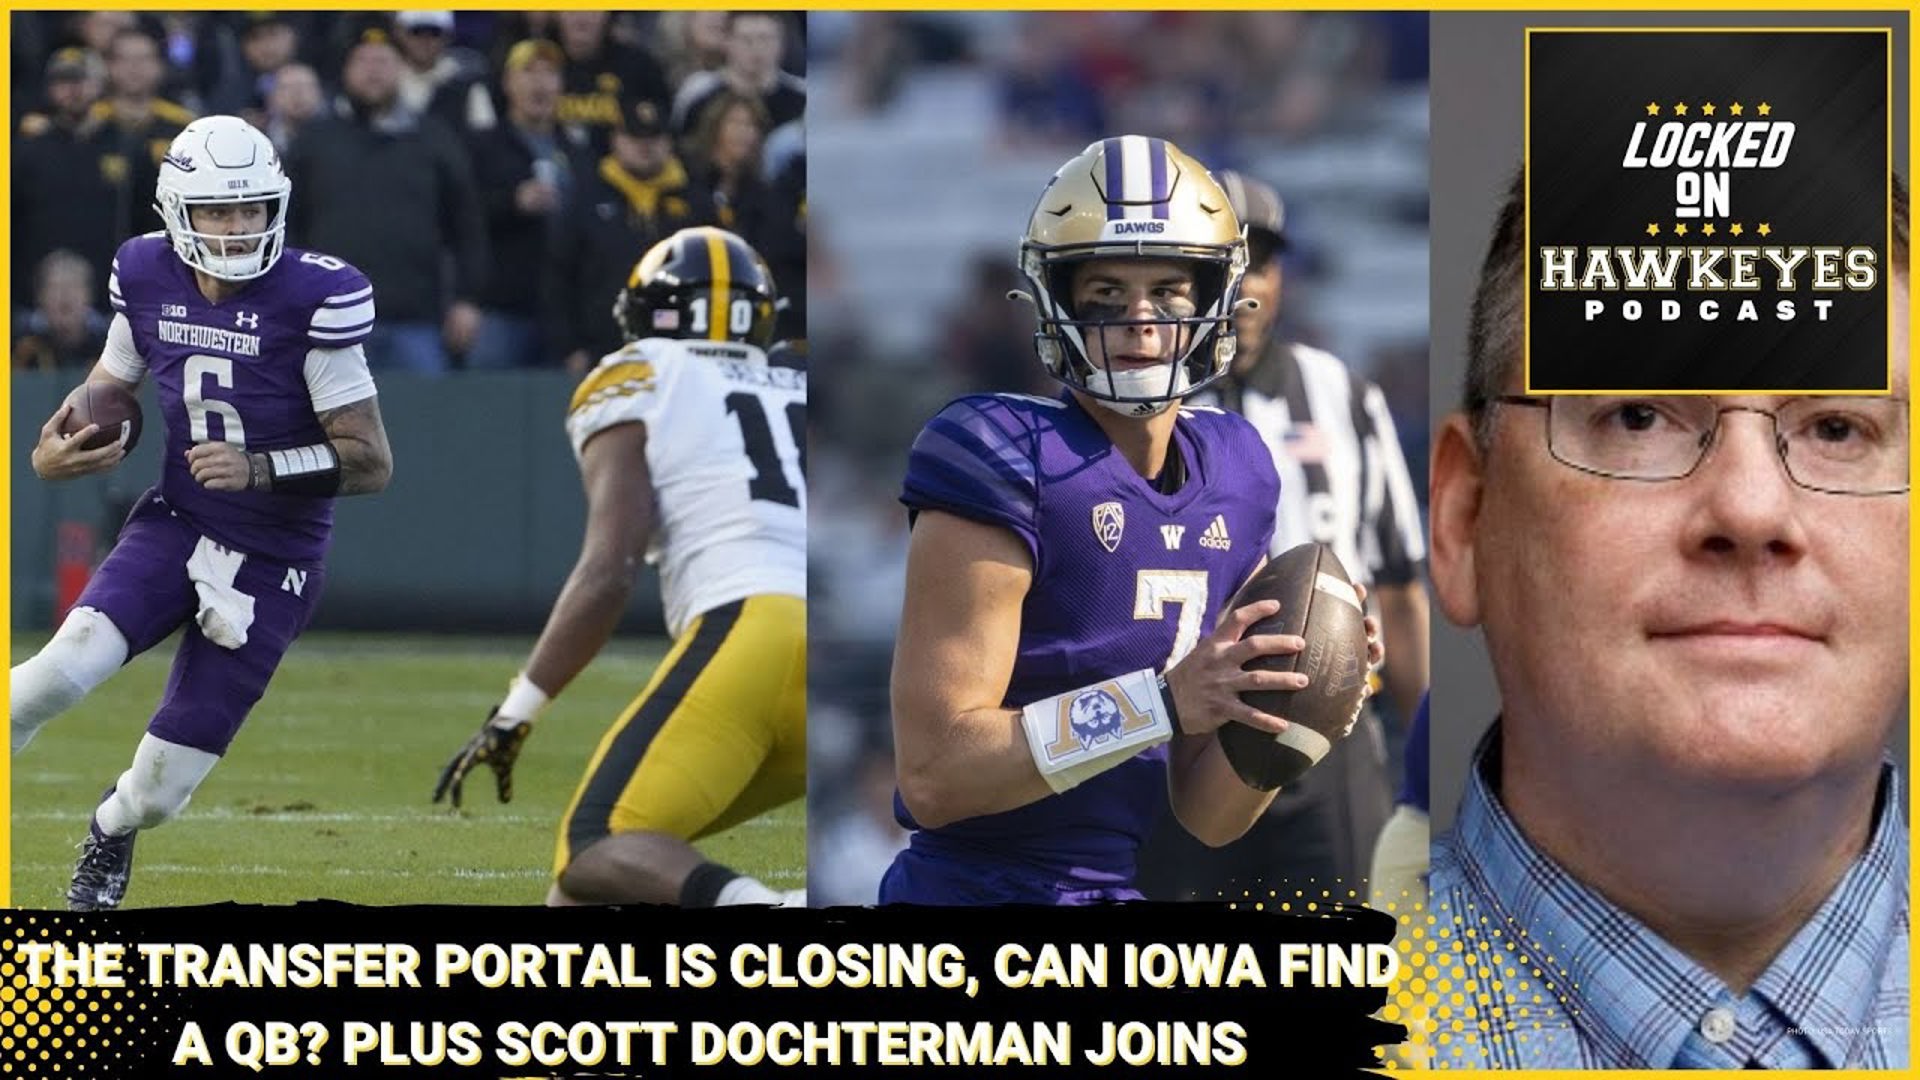 Iowa Football: The Transfer Portal is closing, do the Hawkeyes have a QB? Scott Dochterman joins